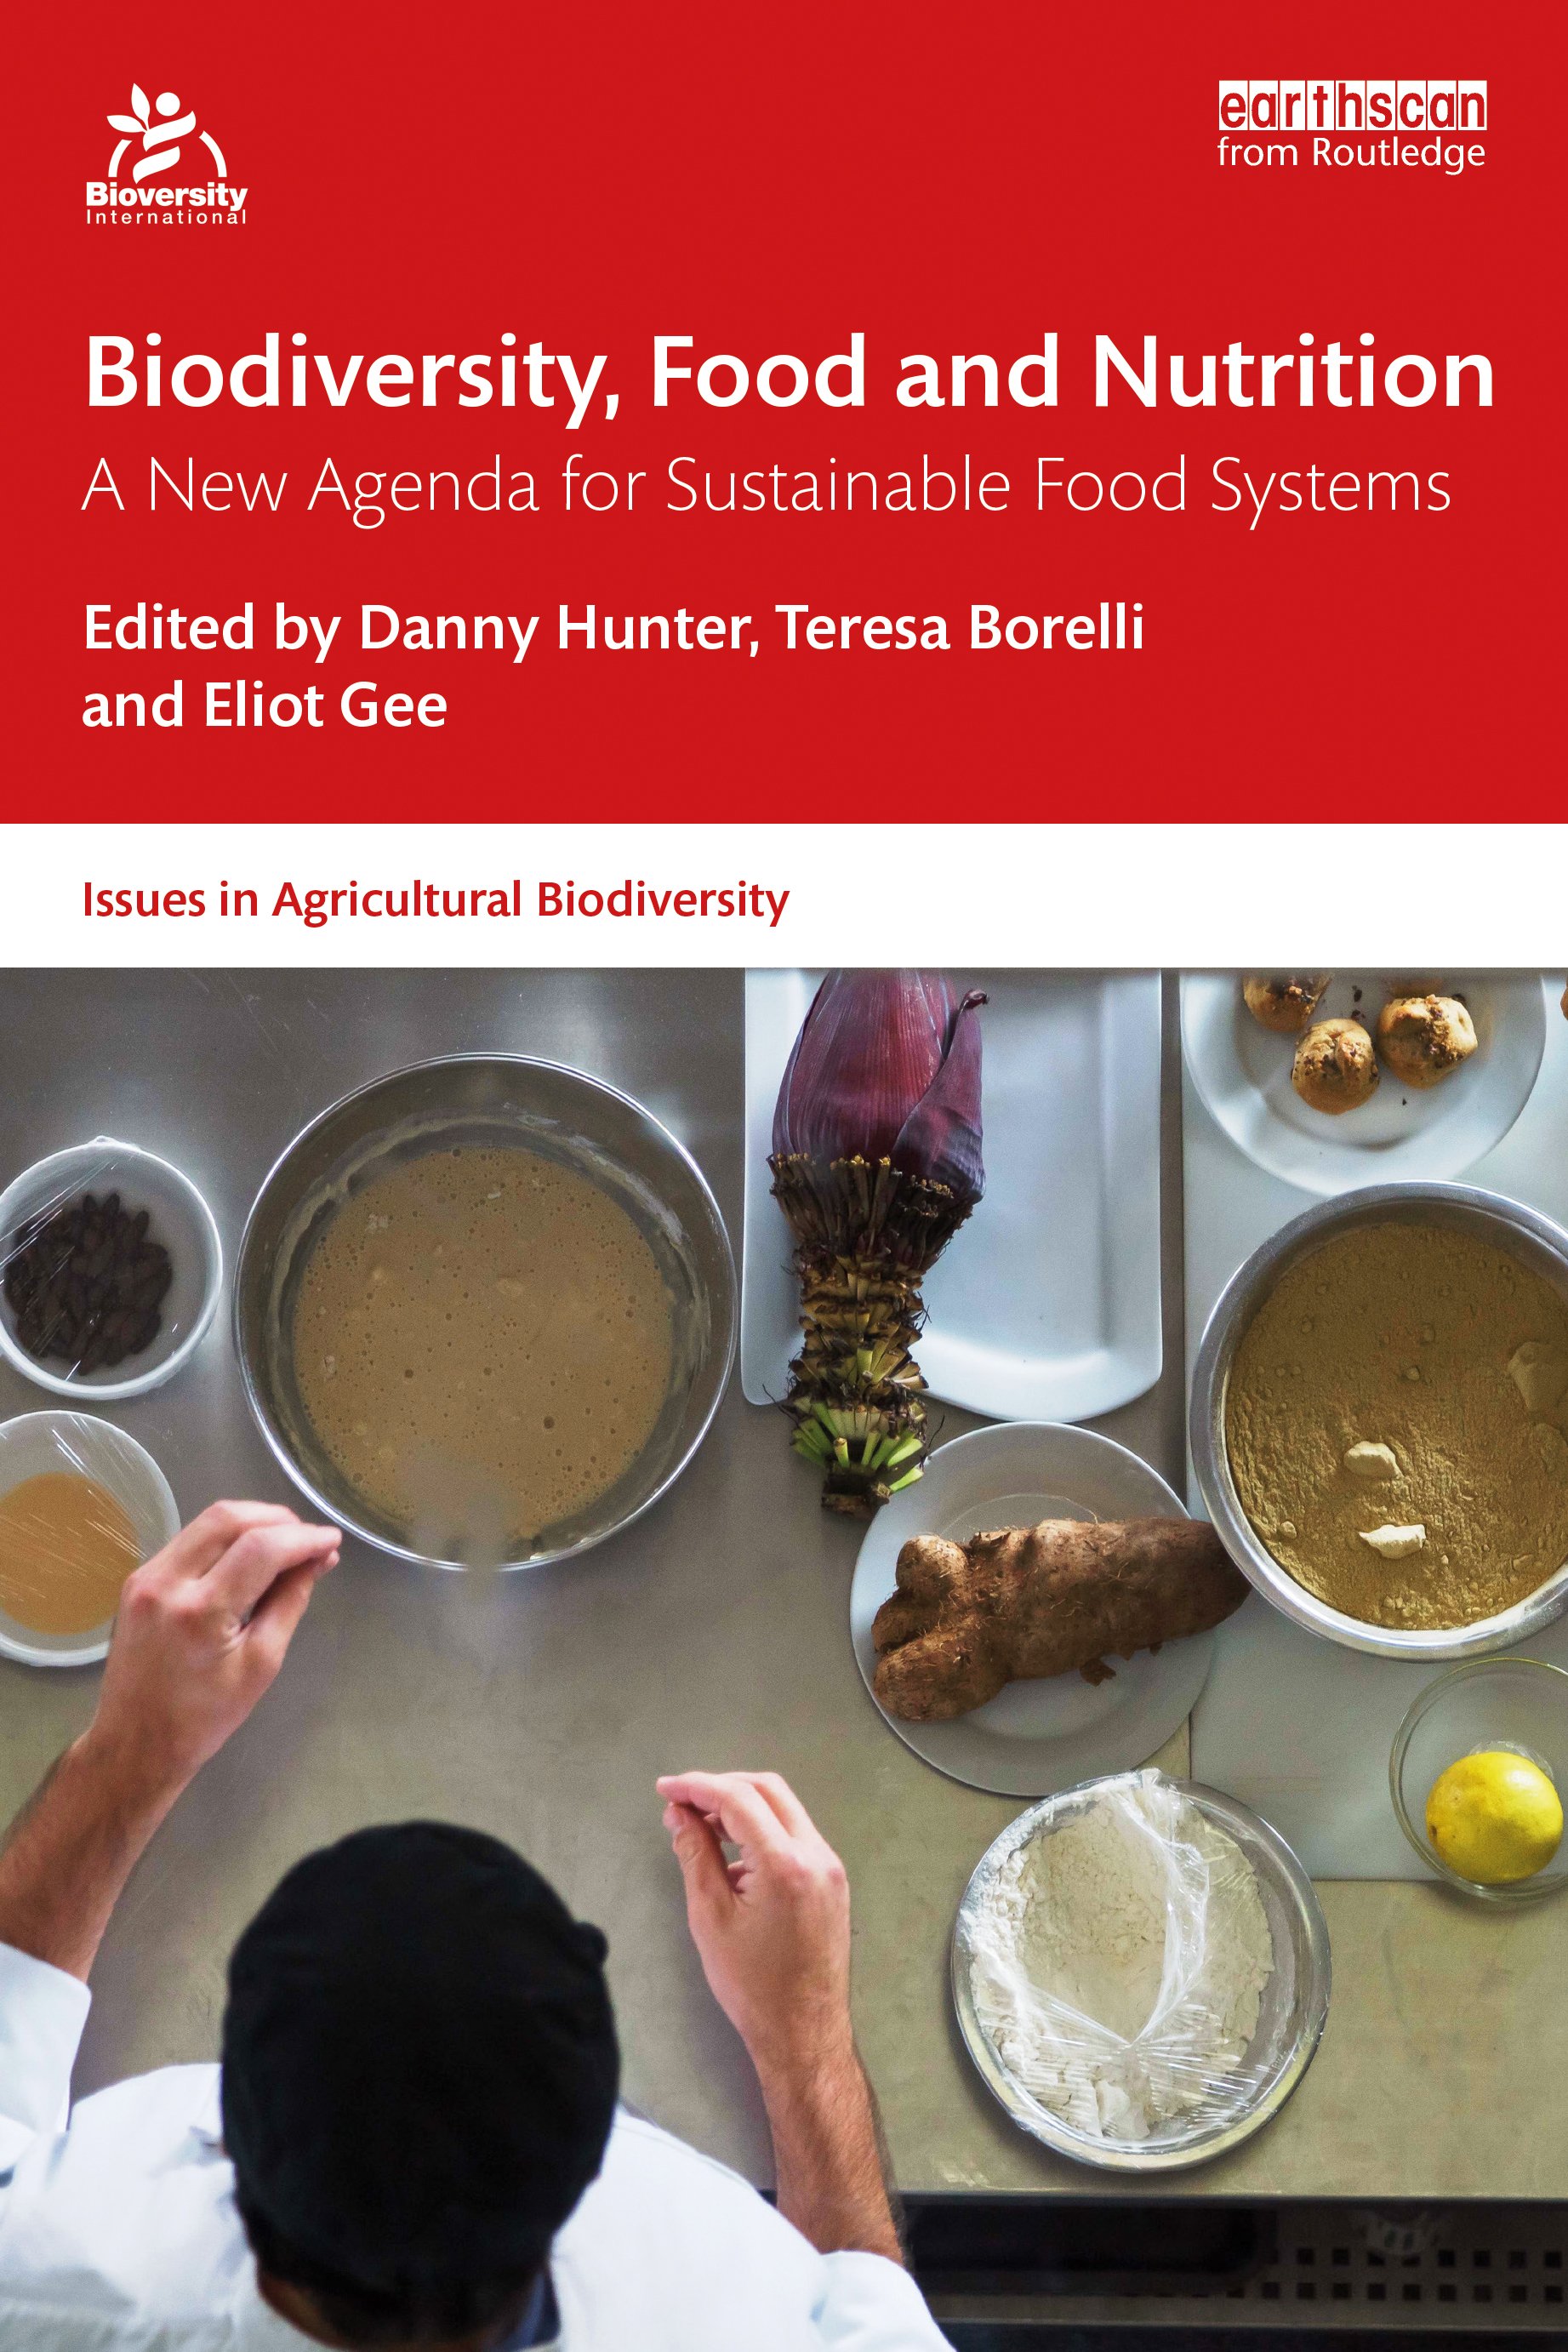 Start me up! Food biodiversity and youth-led innovations